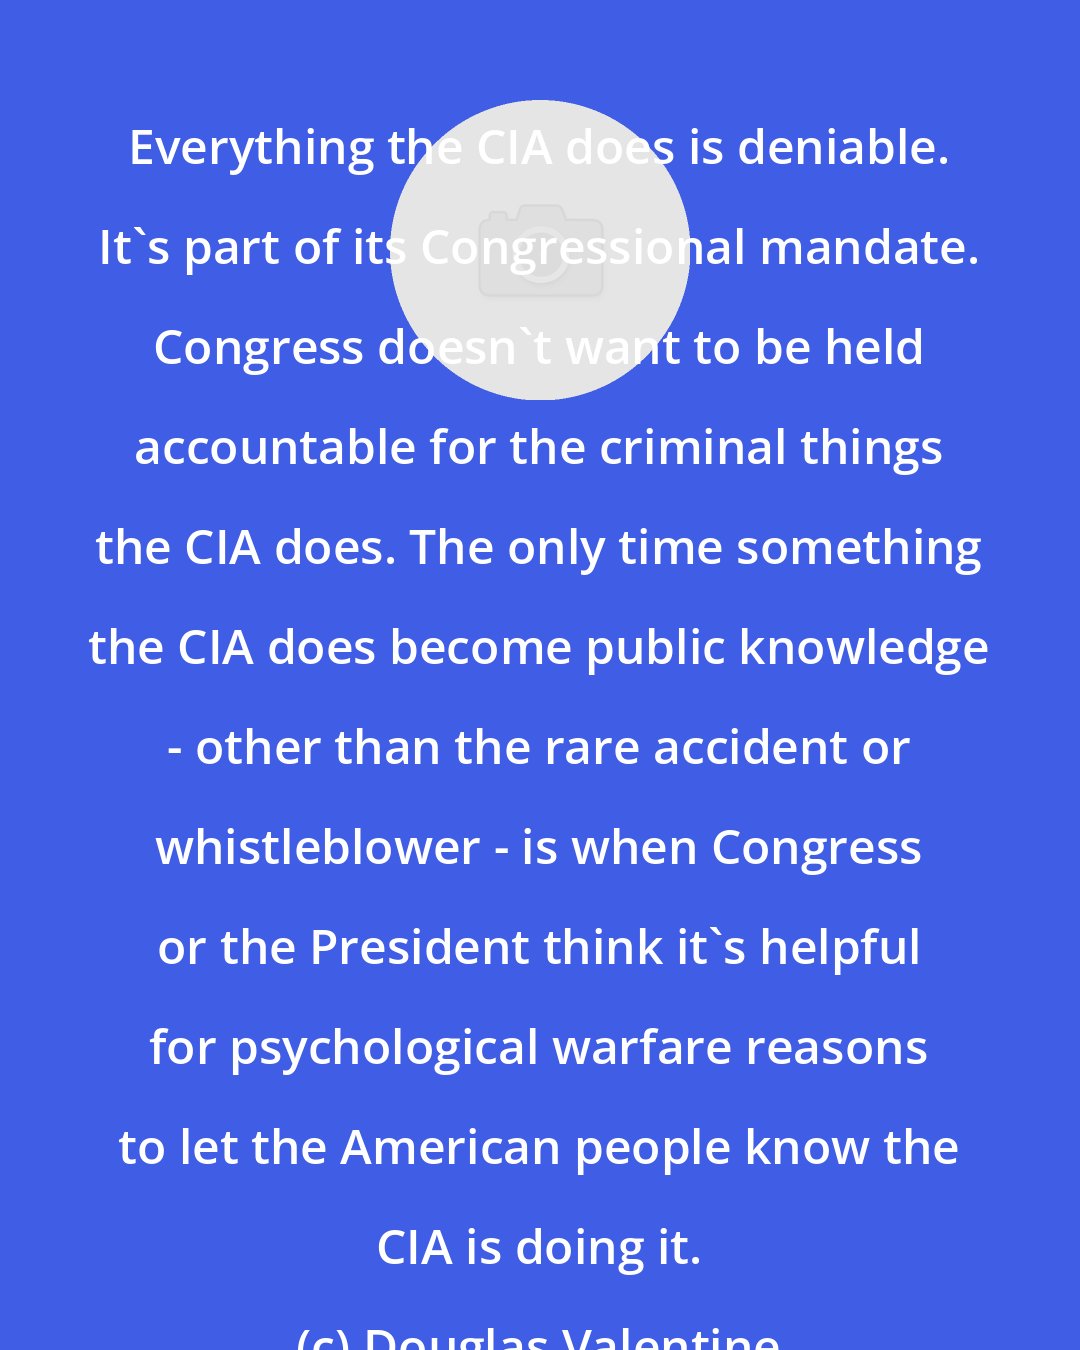 Douglas Valentine: Everything the CIA does is deniable. It's part of its Congressional mandate. Congress doesn't want to be held accountable for the criminal things the CIA does. The only time something the CIA does become public knowledge - other than the rare accident or whistleblower - is when Congress or the President think it's helpful for psychological warfare reasons to let the American people know the CIA is doing it.